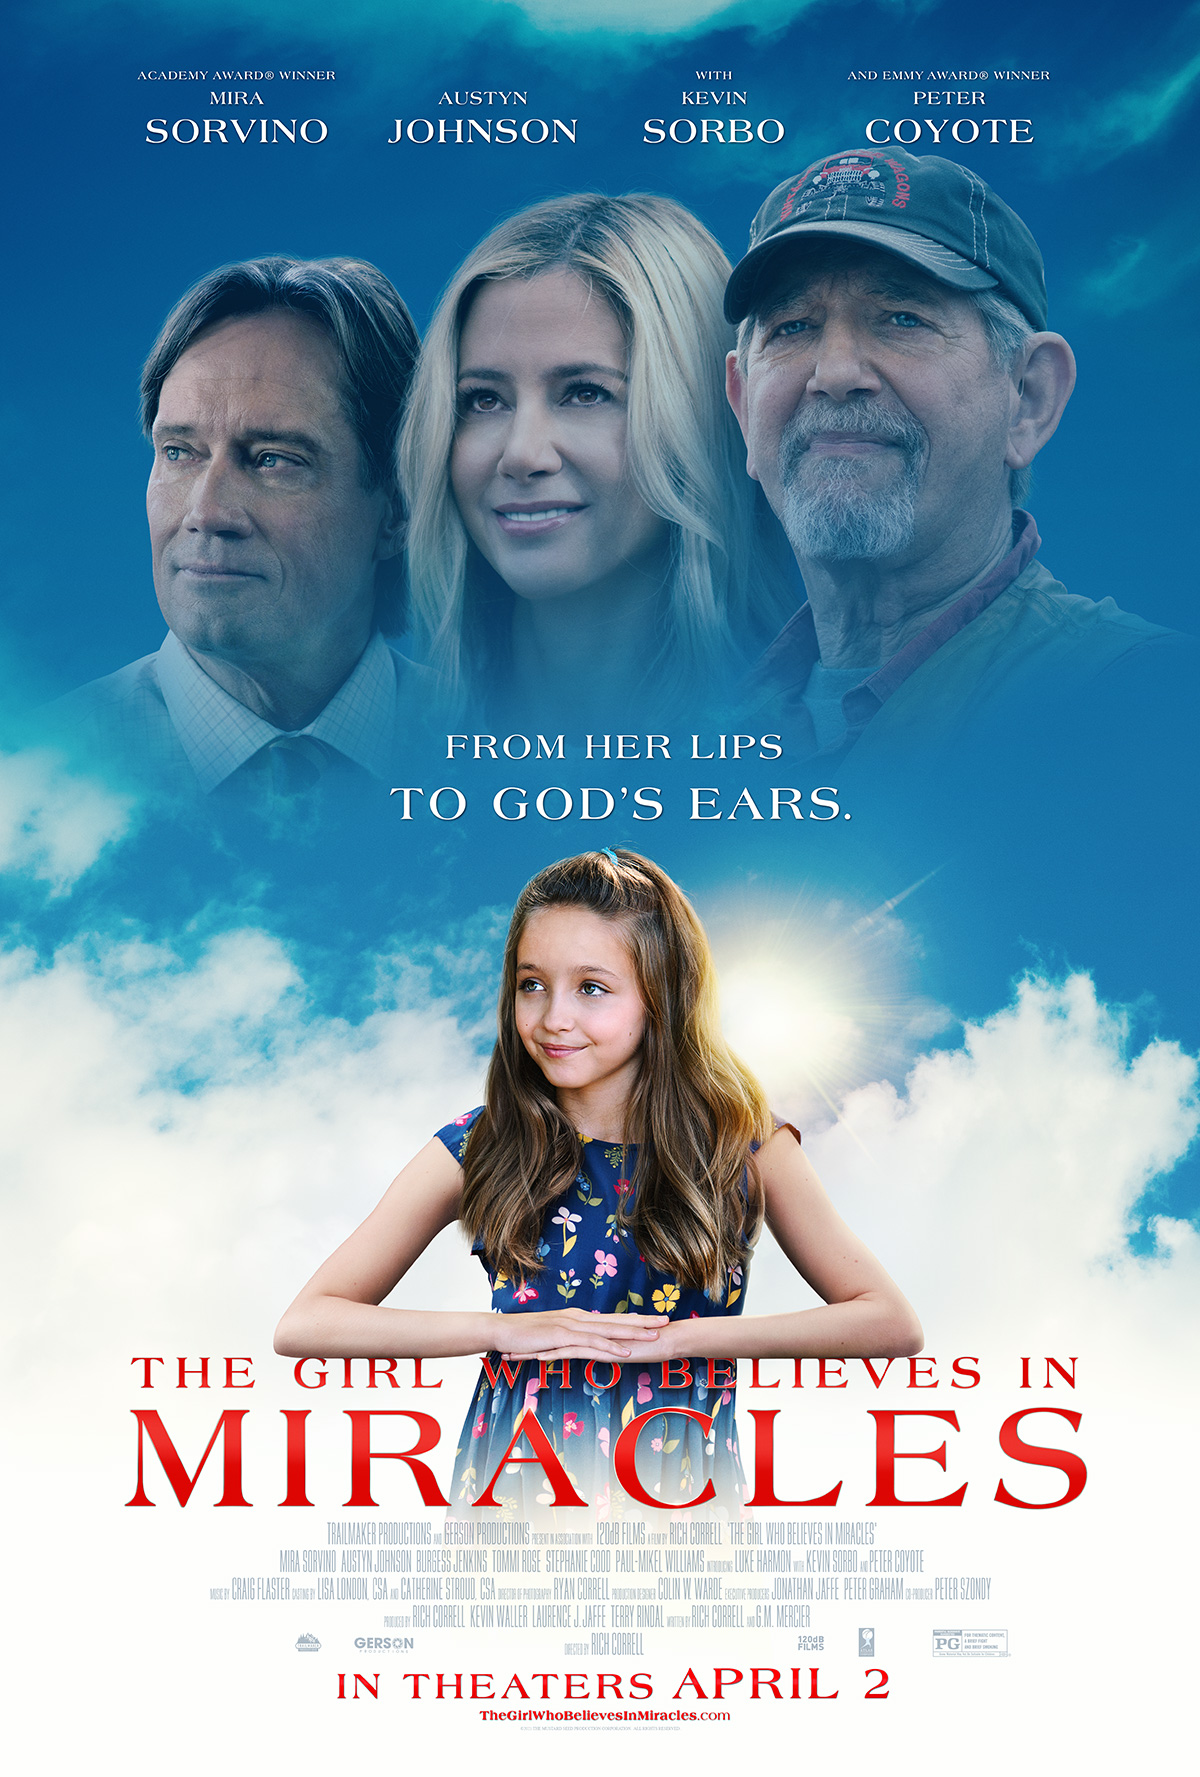 The Girl Who Believes in Miracles online